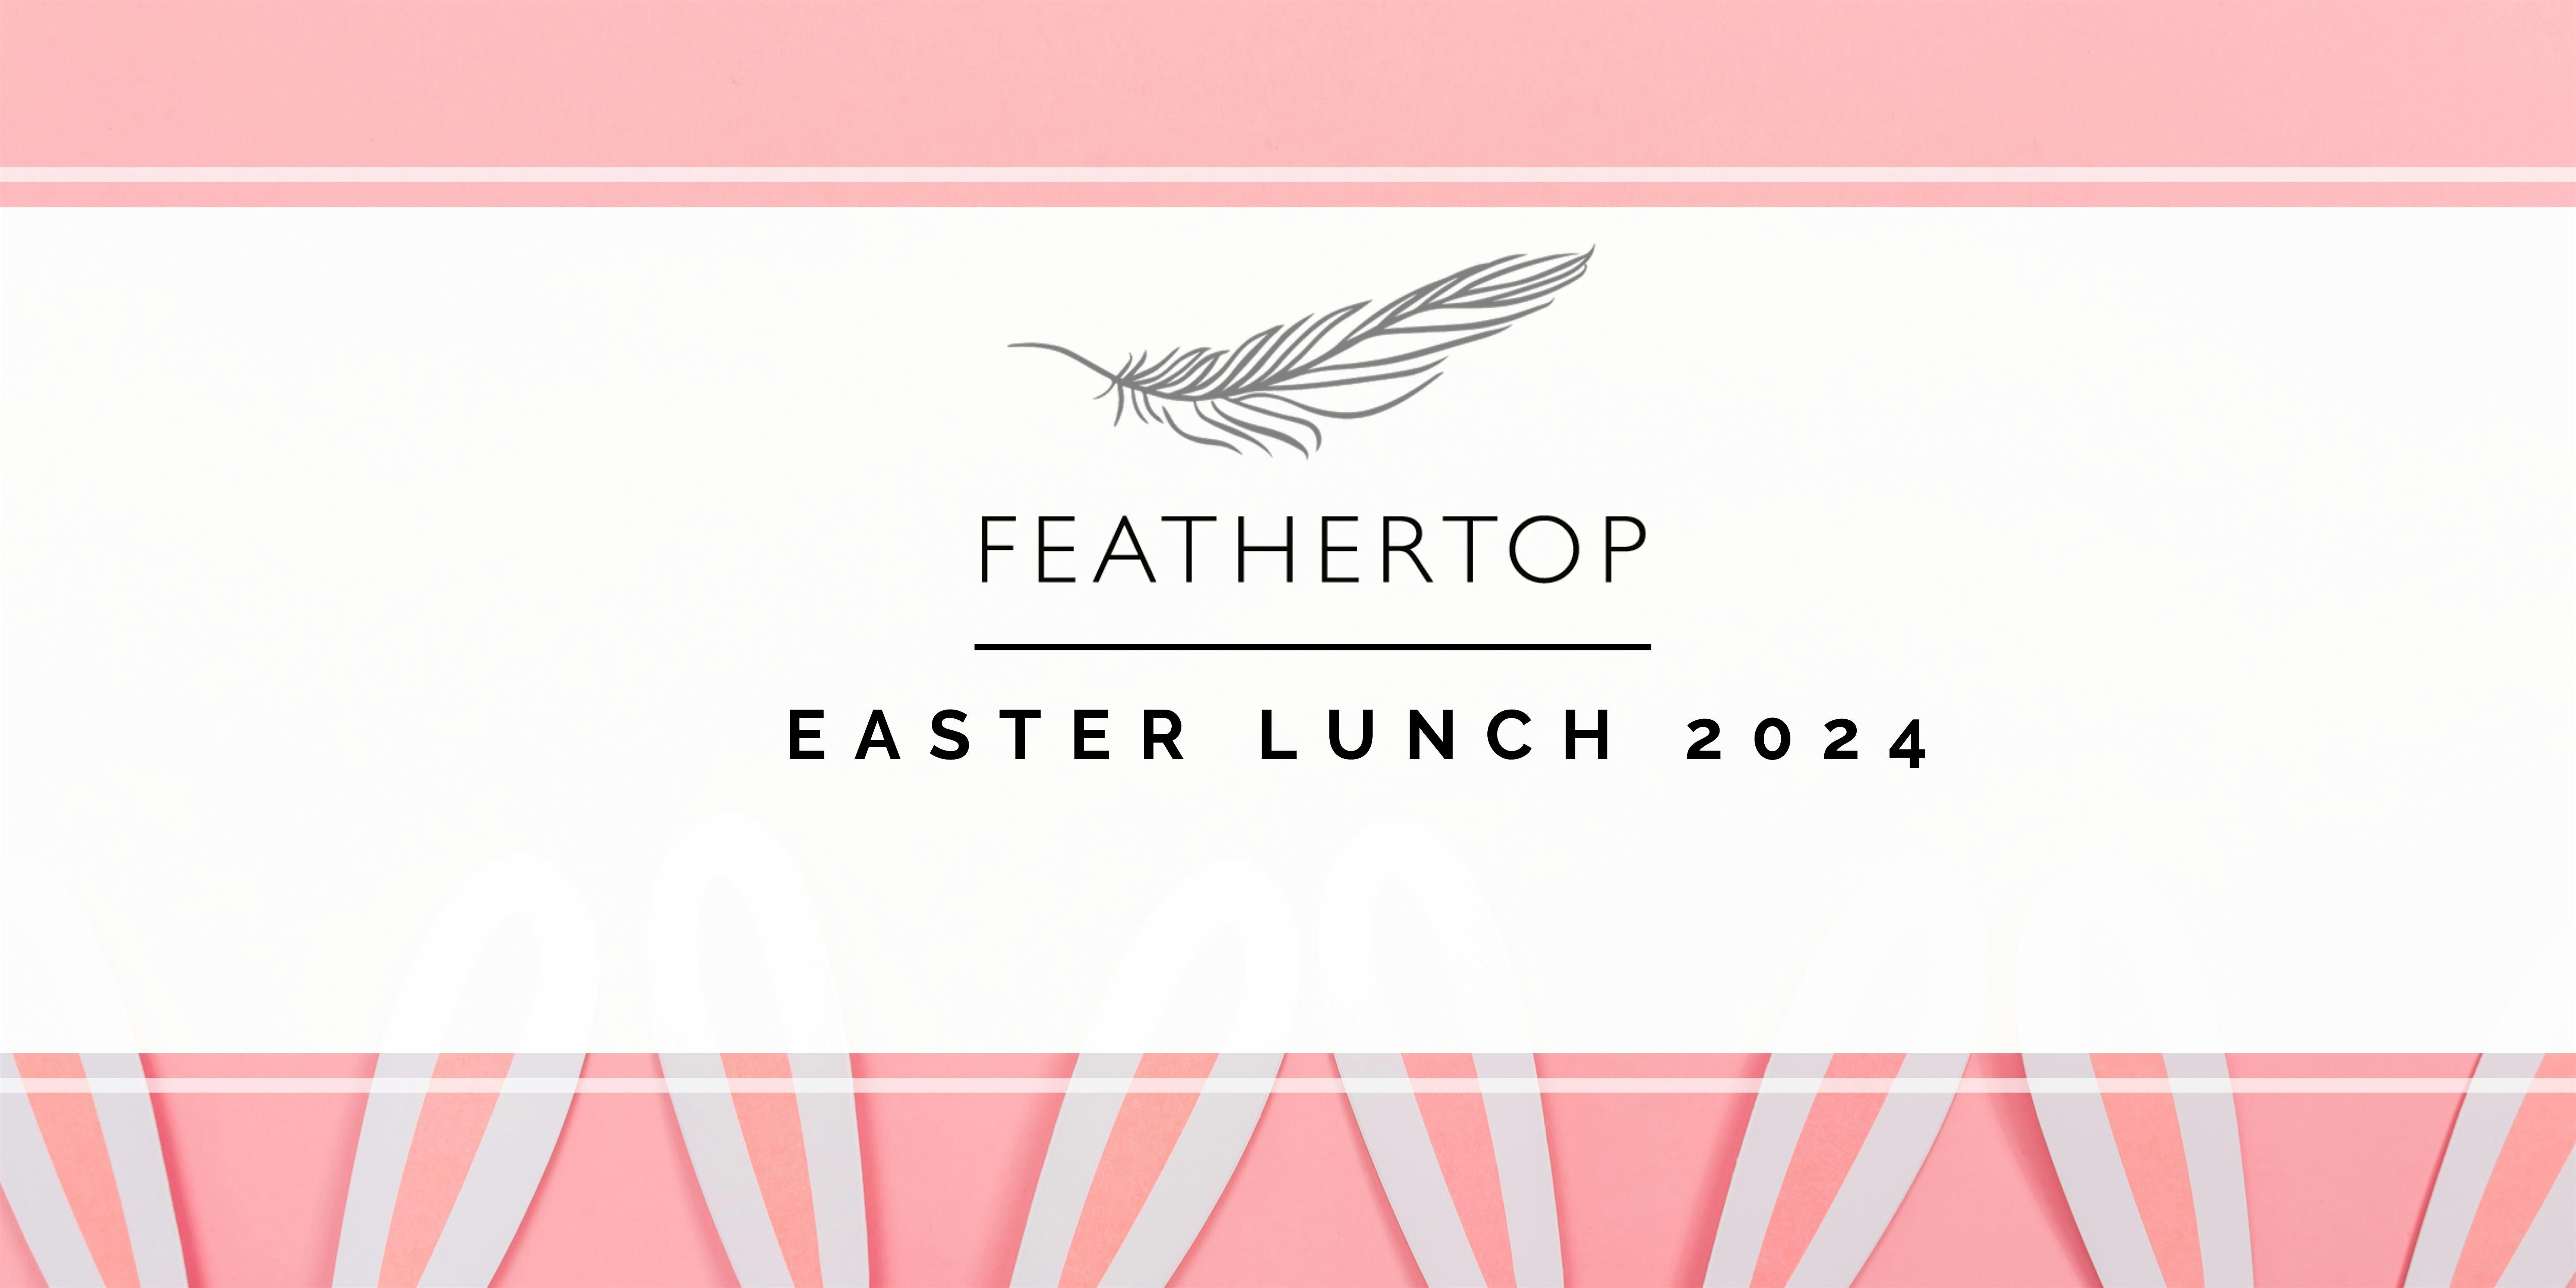 Feathertop Easter Lunch